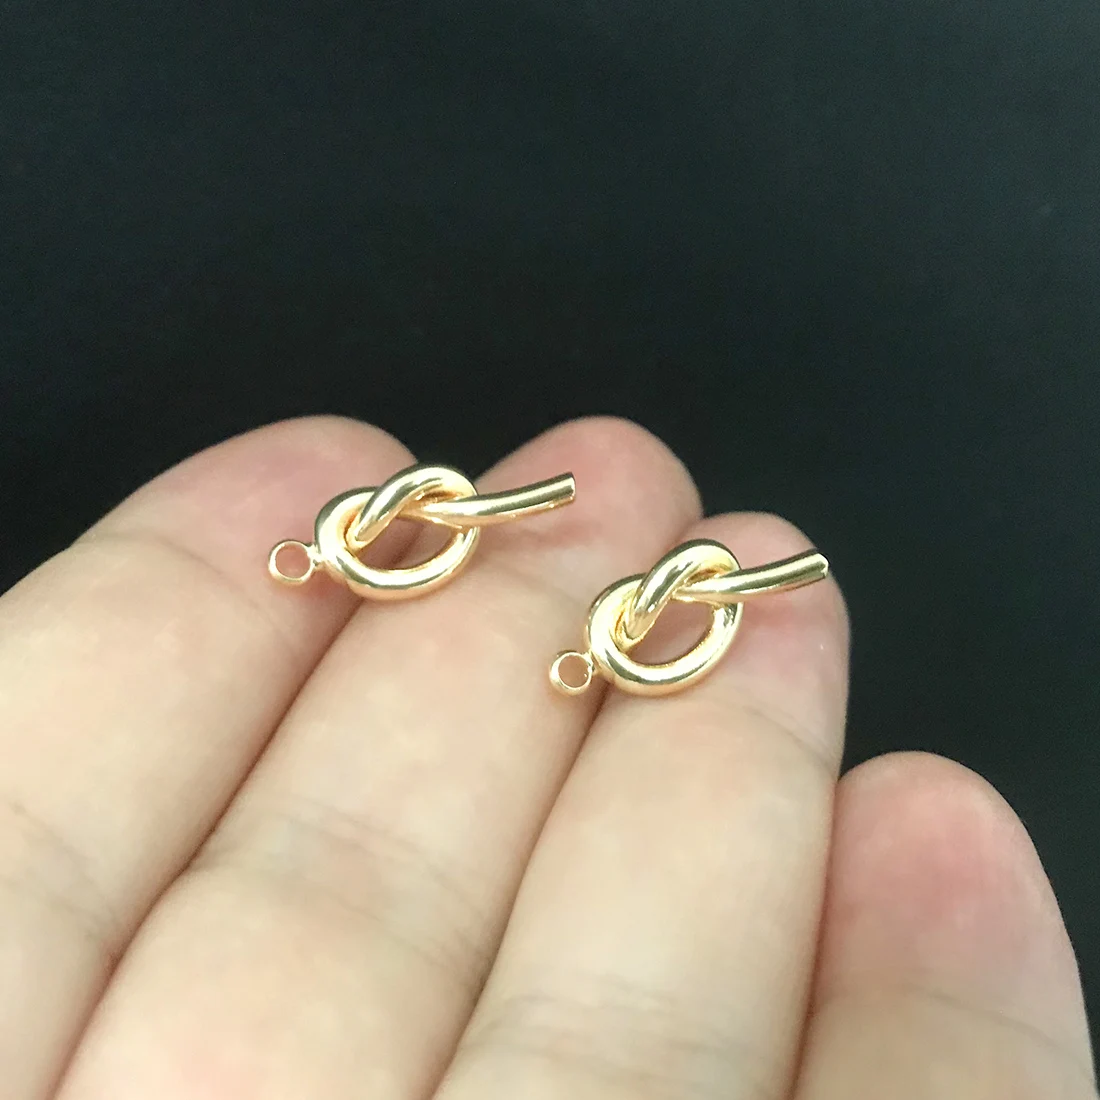 New Original Wild Earrings S925 Silver Pin Ear Stud Female Simple Ins Network Red Personality Earrings Earring Making Supplies images - 6